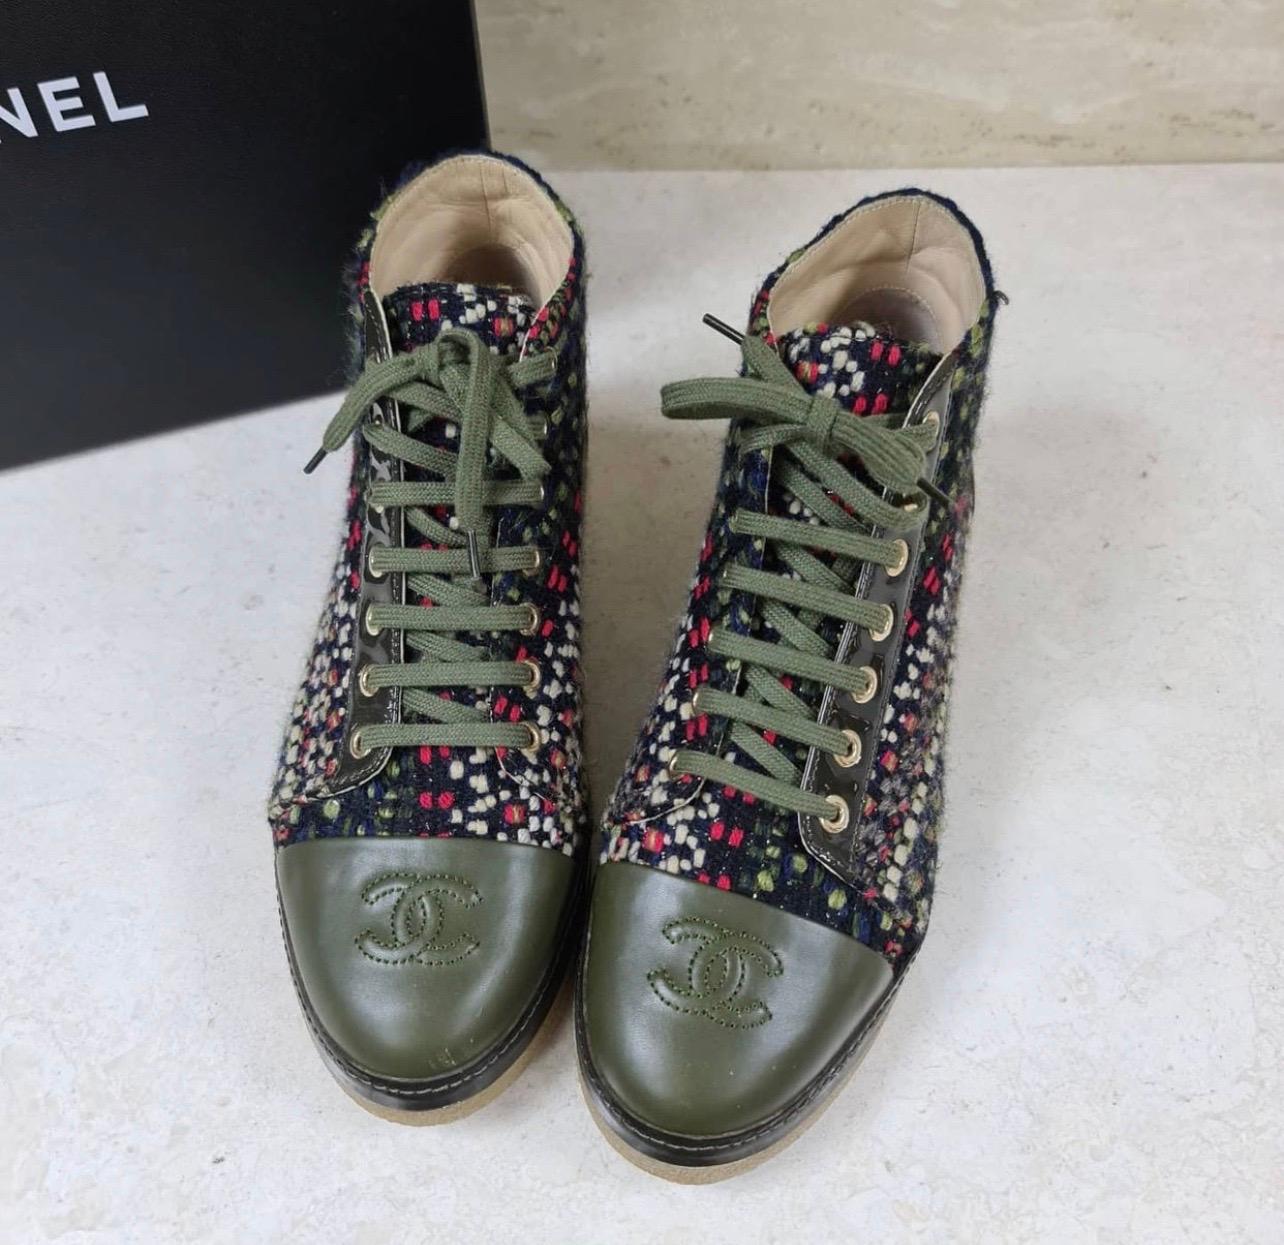 Category: Shoes. 
Sub-category: Ankle Boots. 
Designer: Chanel. 
Condition: Good used. Slight scratches on toes.
Material: Tweed, Leather
Colour: khaki. 
Size: 38.5 EU
No original packaging.